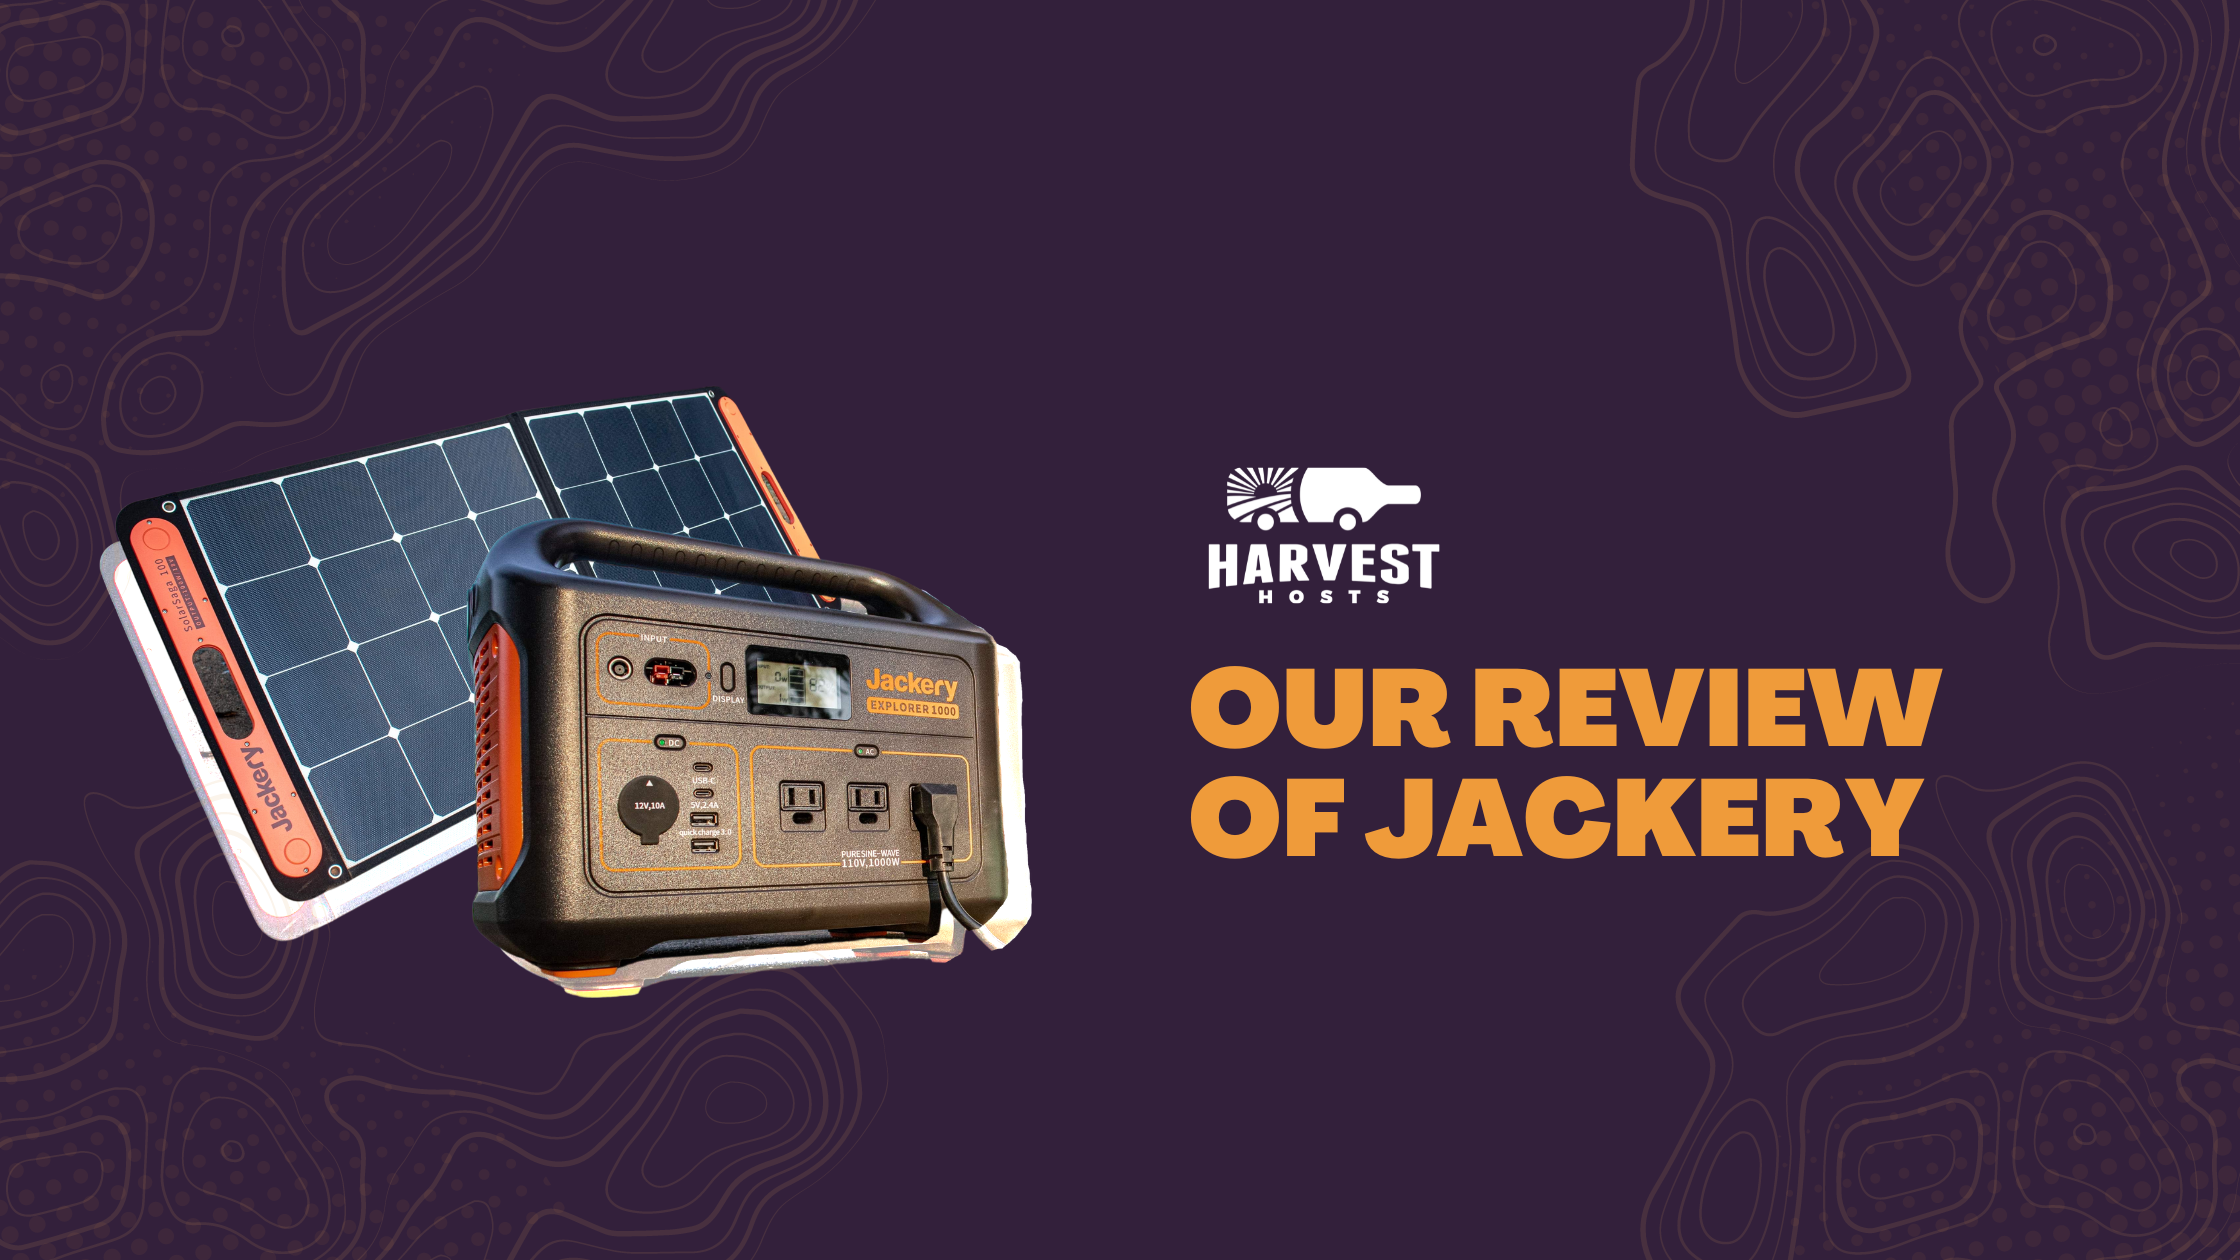 Our Review of Jackery Power Stations